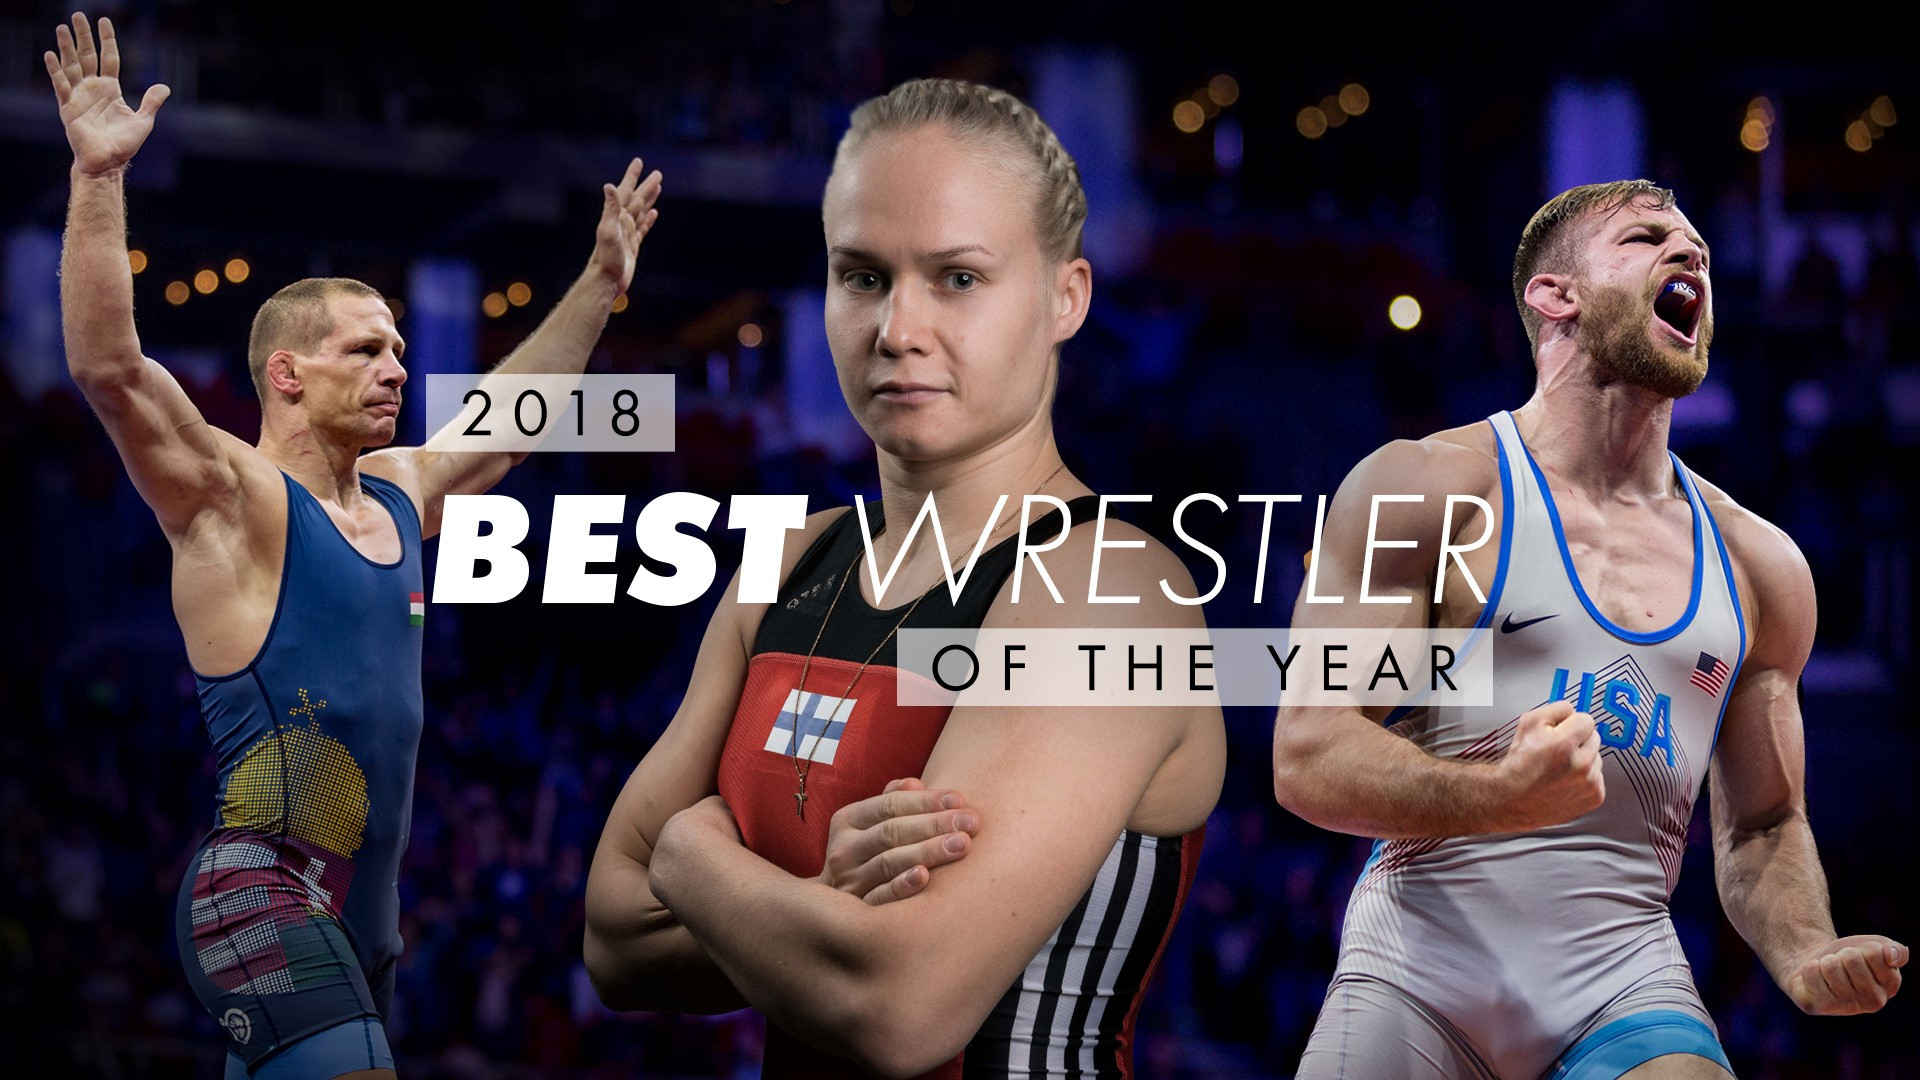 UWW name Taylor, Olli and Bacsi as 2018 wrestlers of the year